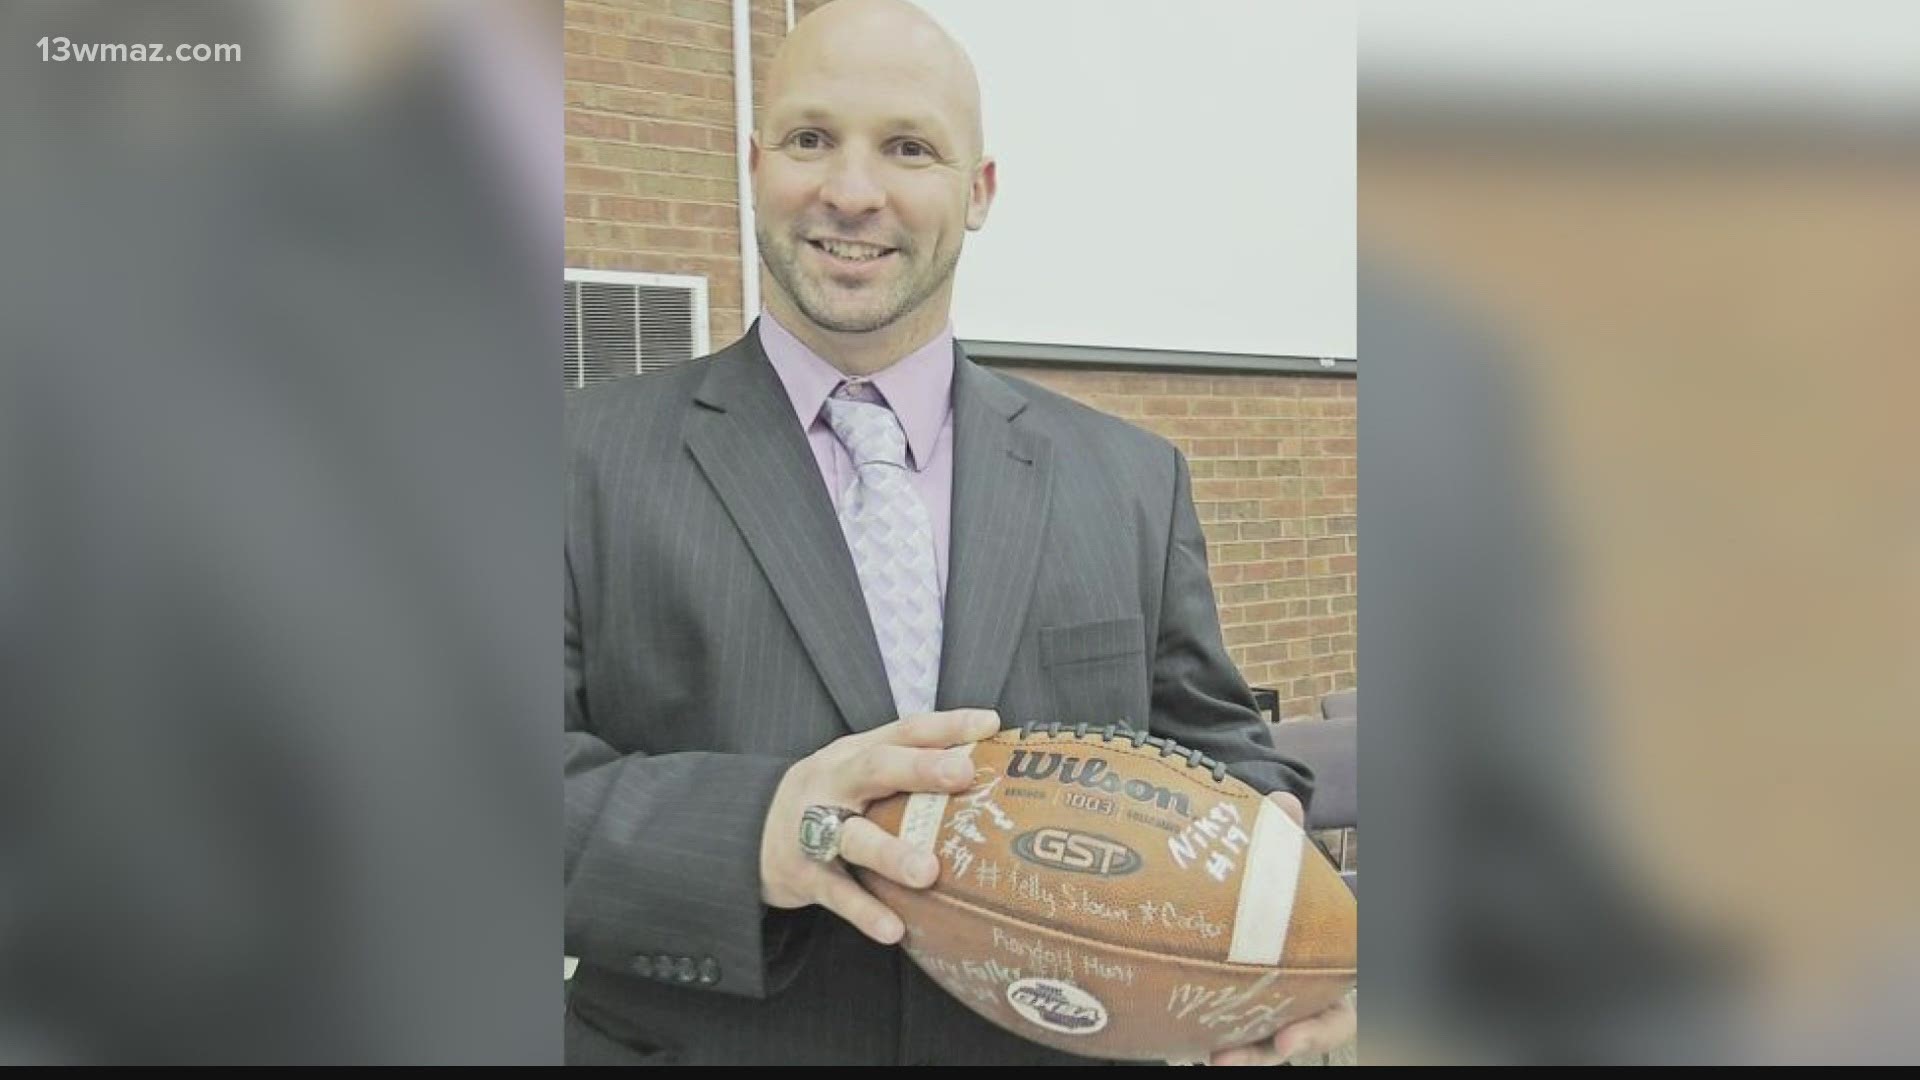 The Bibb County athletic department learned that Rutland's head football coach and athletic director Rusty Easom was leaving to fill the same vacancy at Griffin